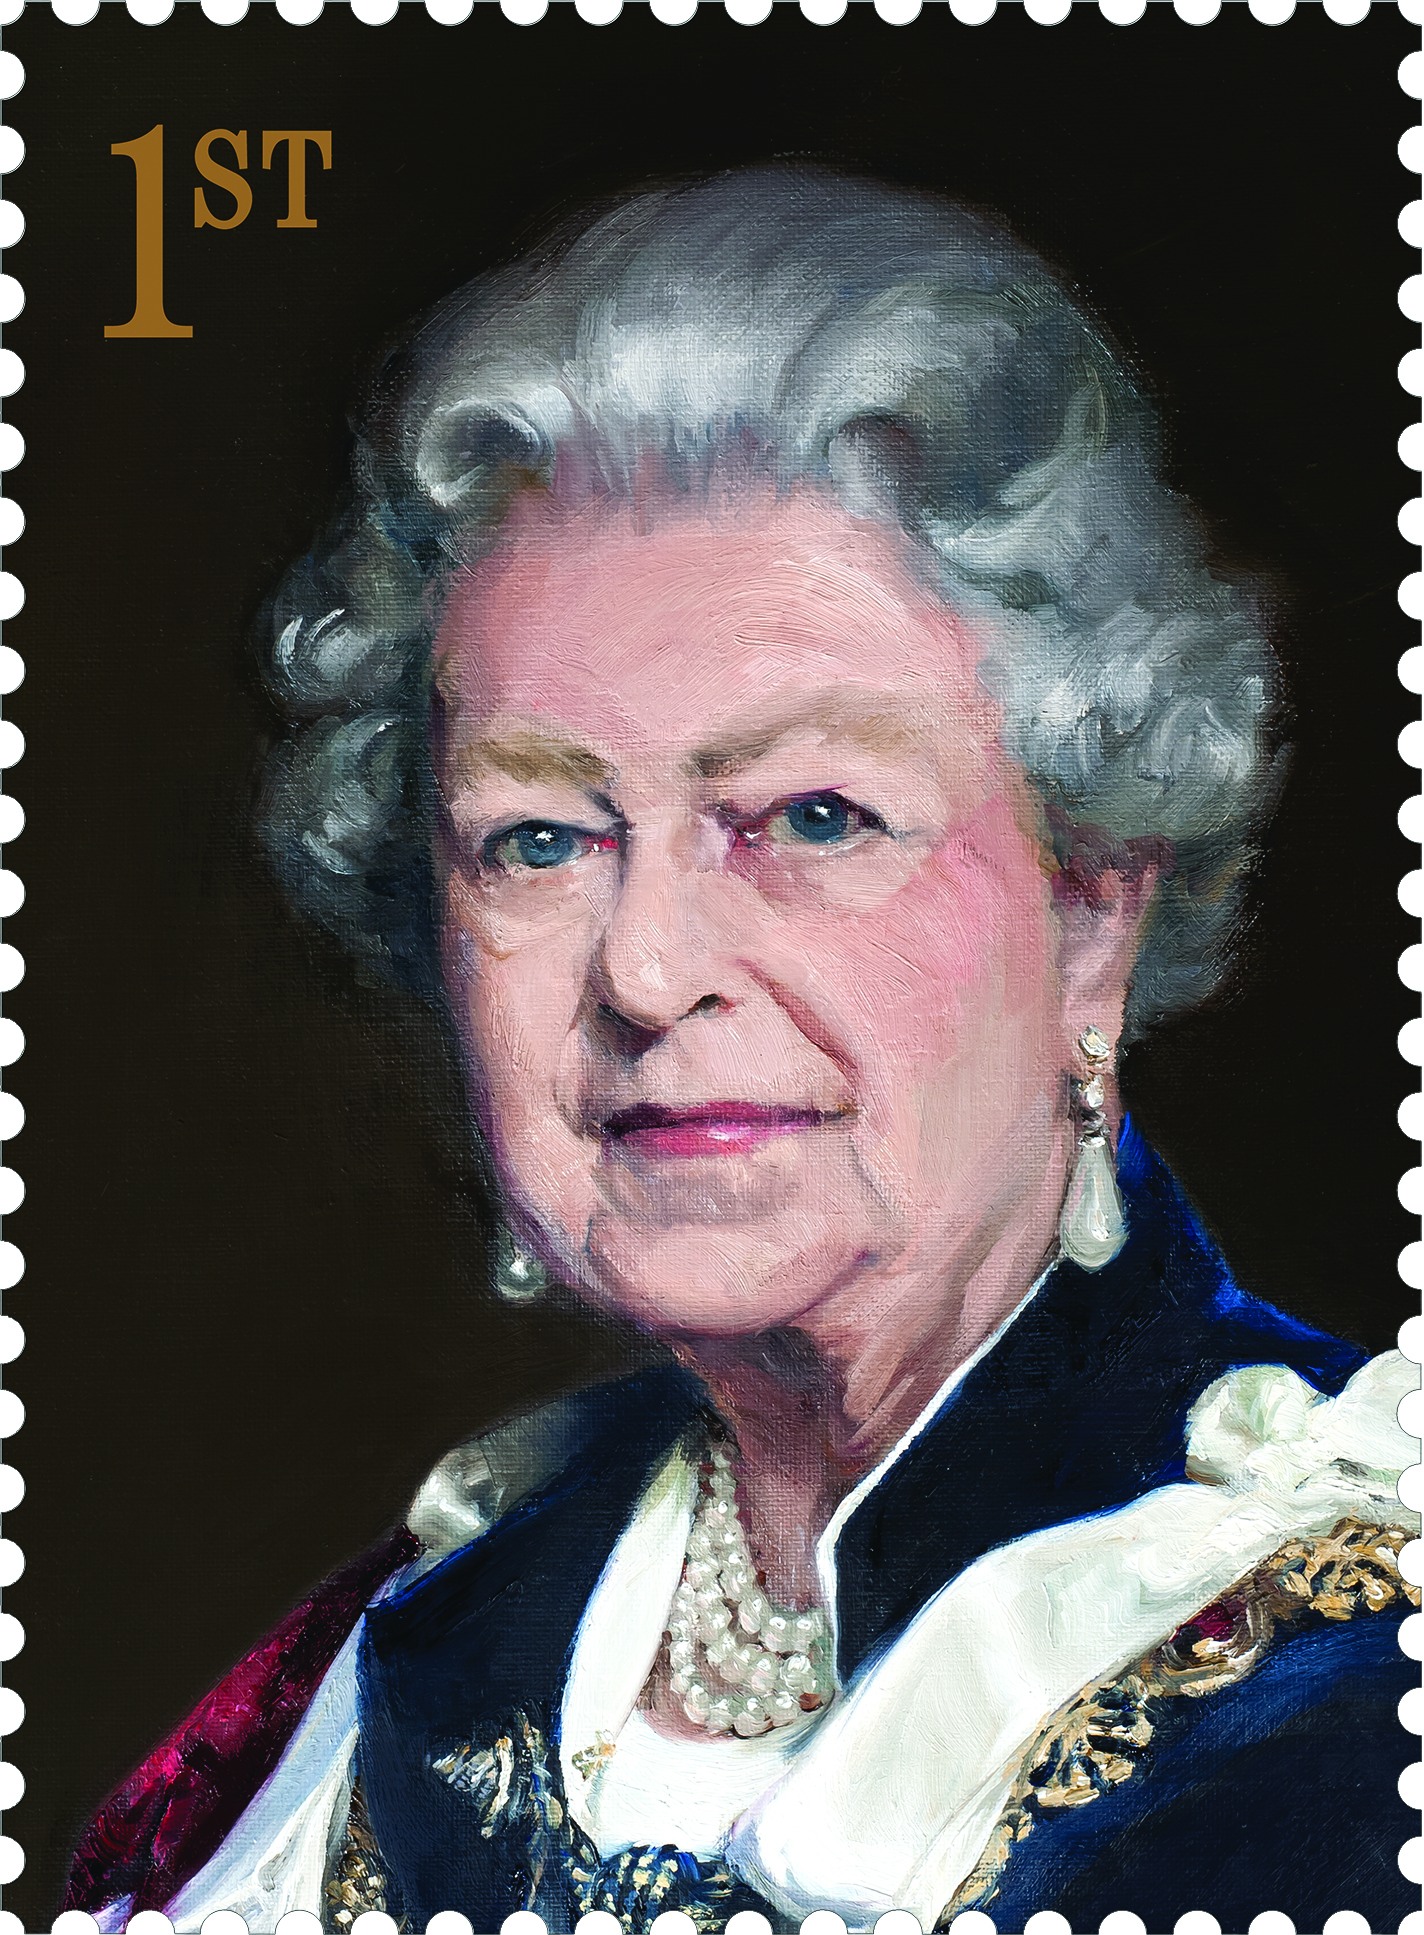 1st class coro - New Portrait of the Queen revealed by Royal Mail